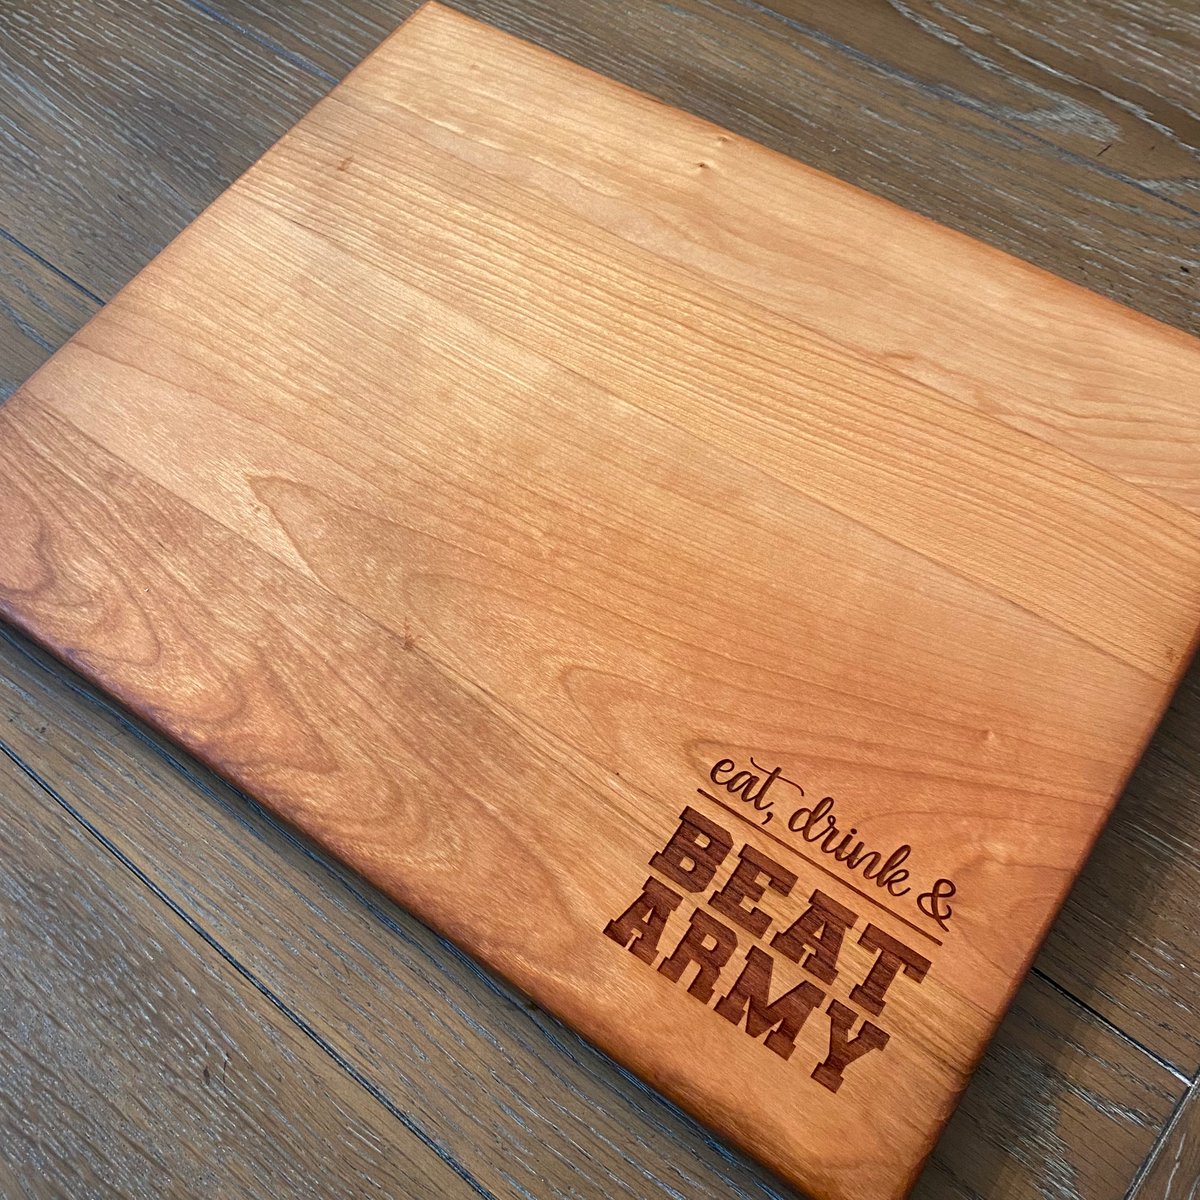 https://assets.bigcartel.com/product_images/8a54e382-a342-498c-be38-beaff489fe2e/cutting-boards.jpg?auto=format&fit=max&h=1200&w=1200